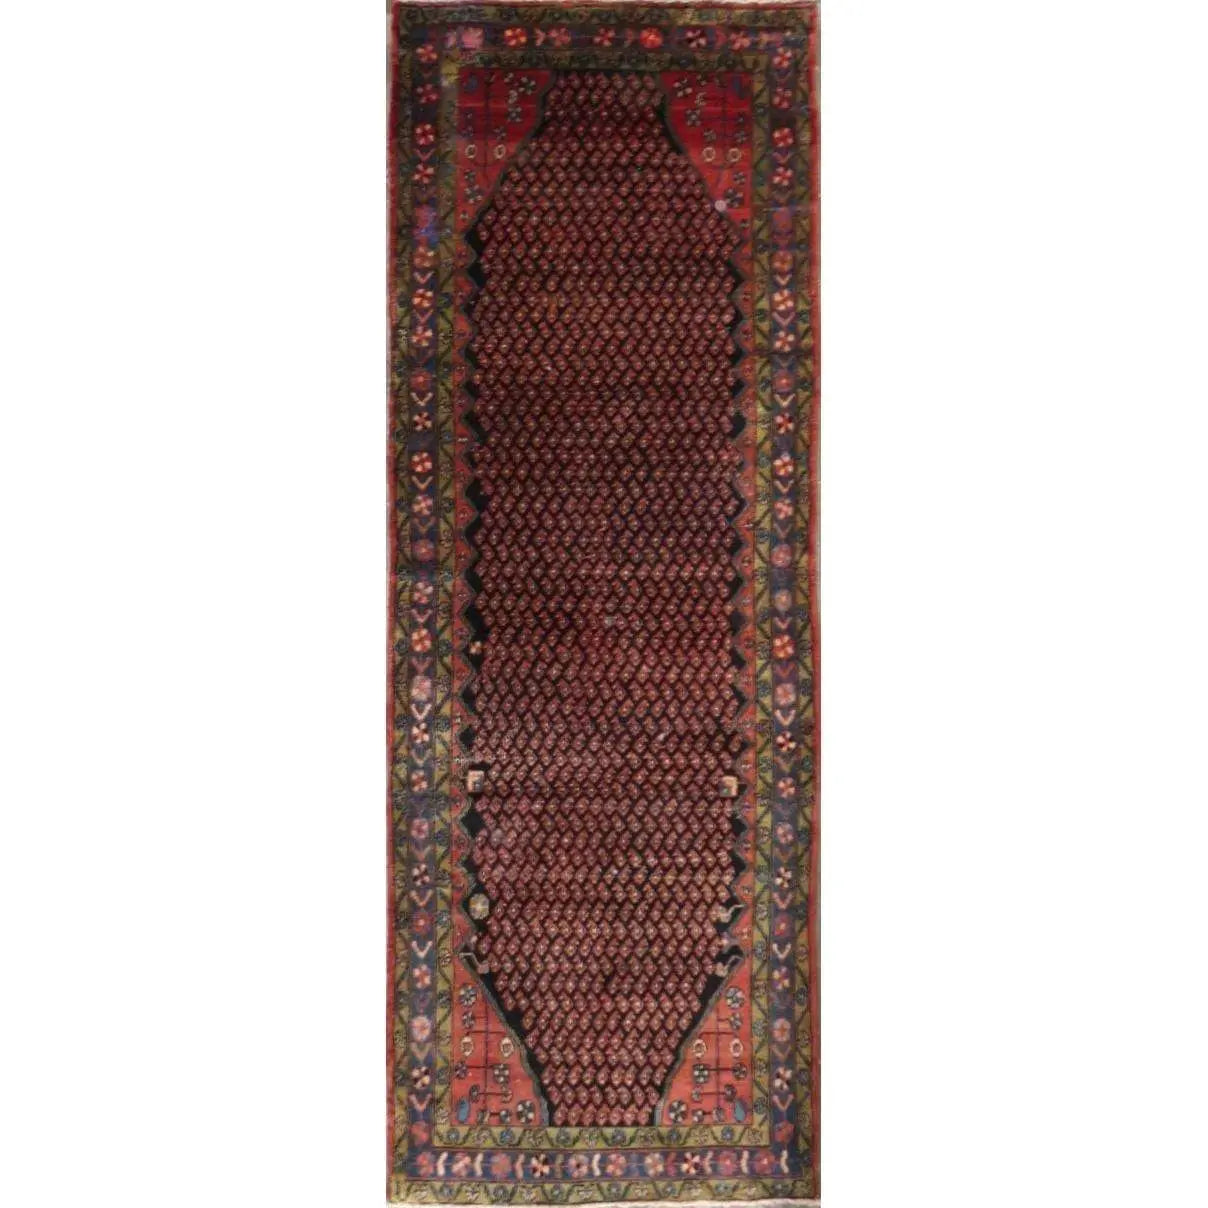 Hand-Knotted Persian Wool Rug _ Luxurious Vintage Design, 10'2" x 3'5", Artisan Crafted